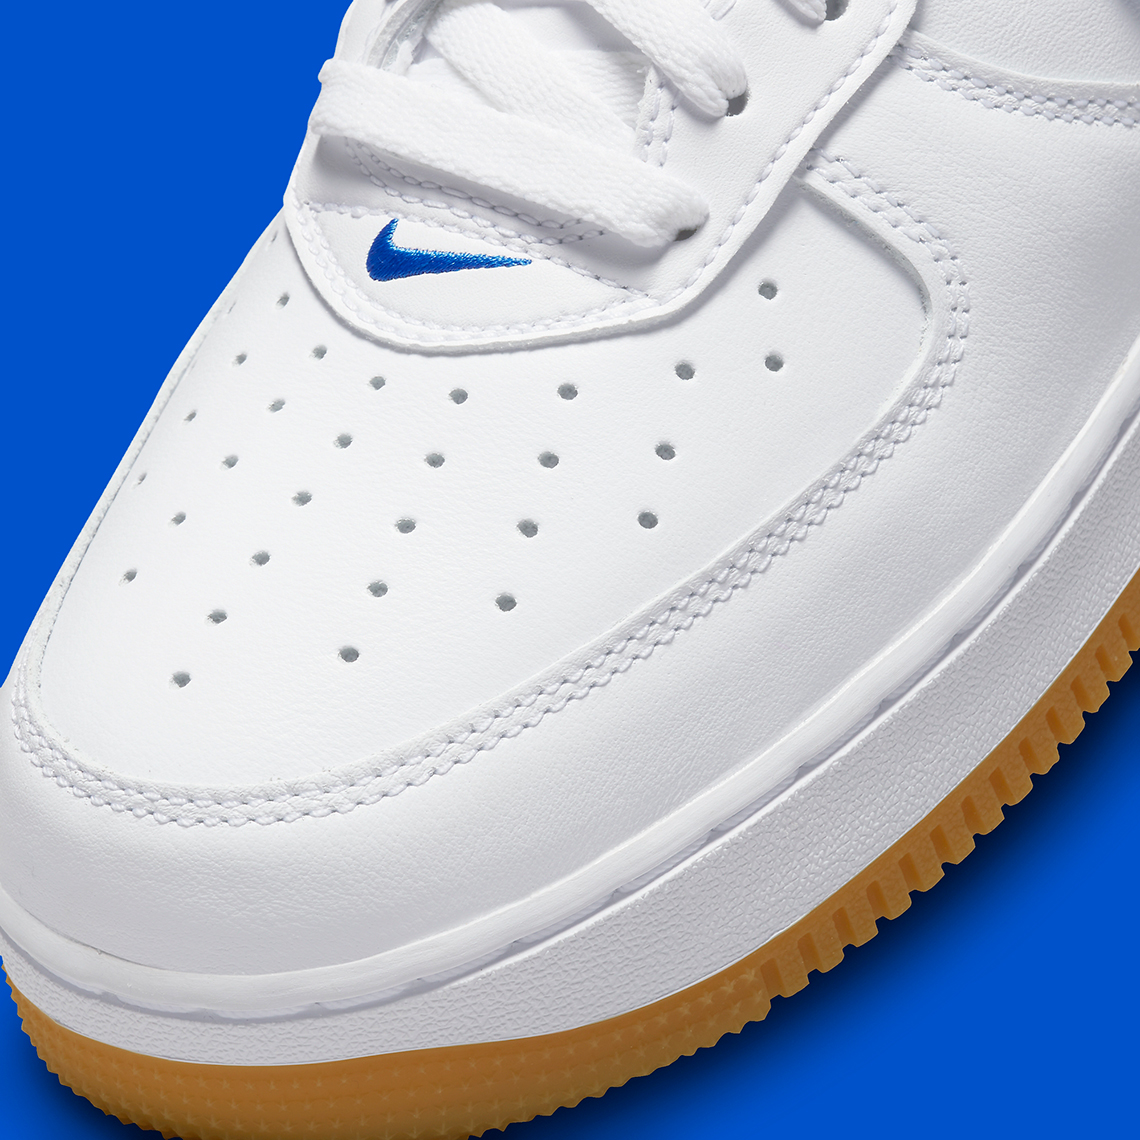 nike air force 1 low since 82 toothbrush dj3911 101 5